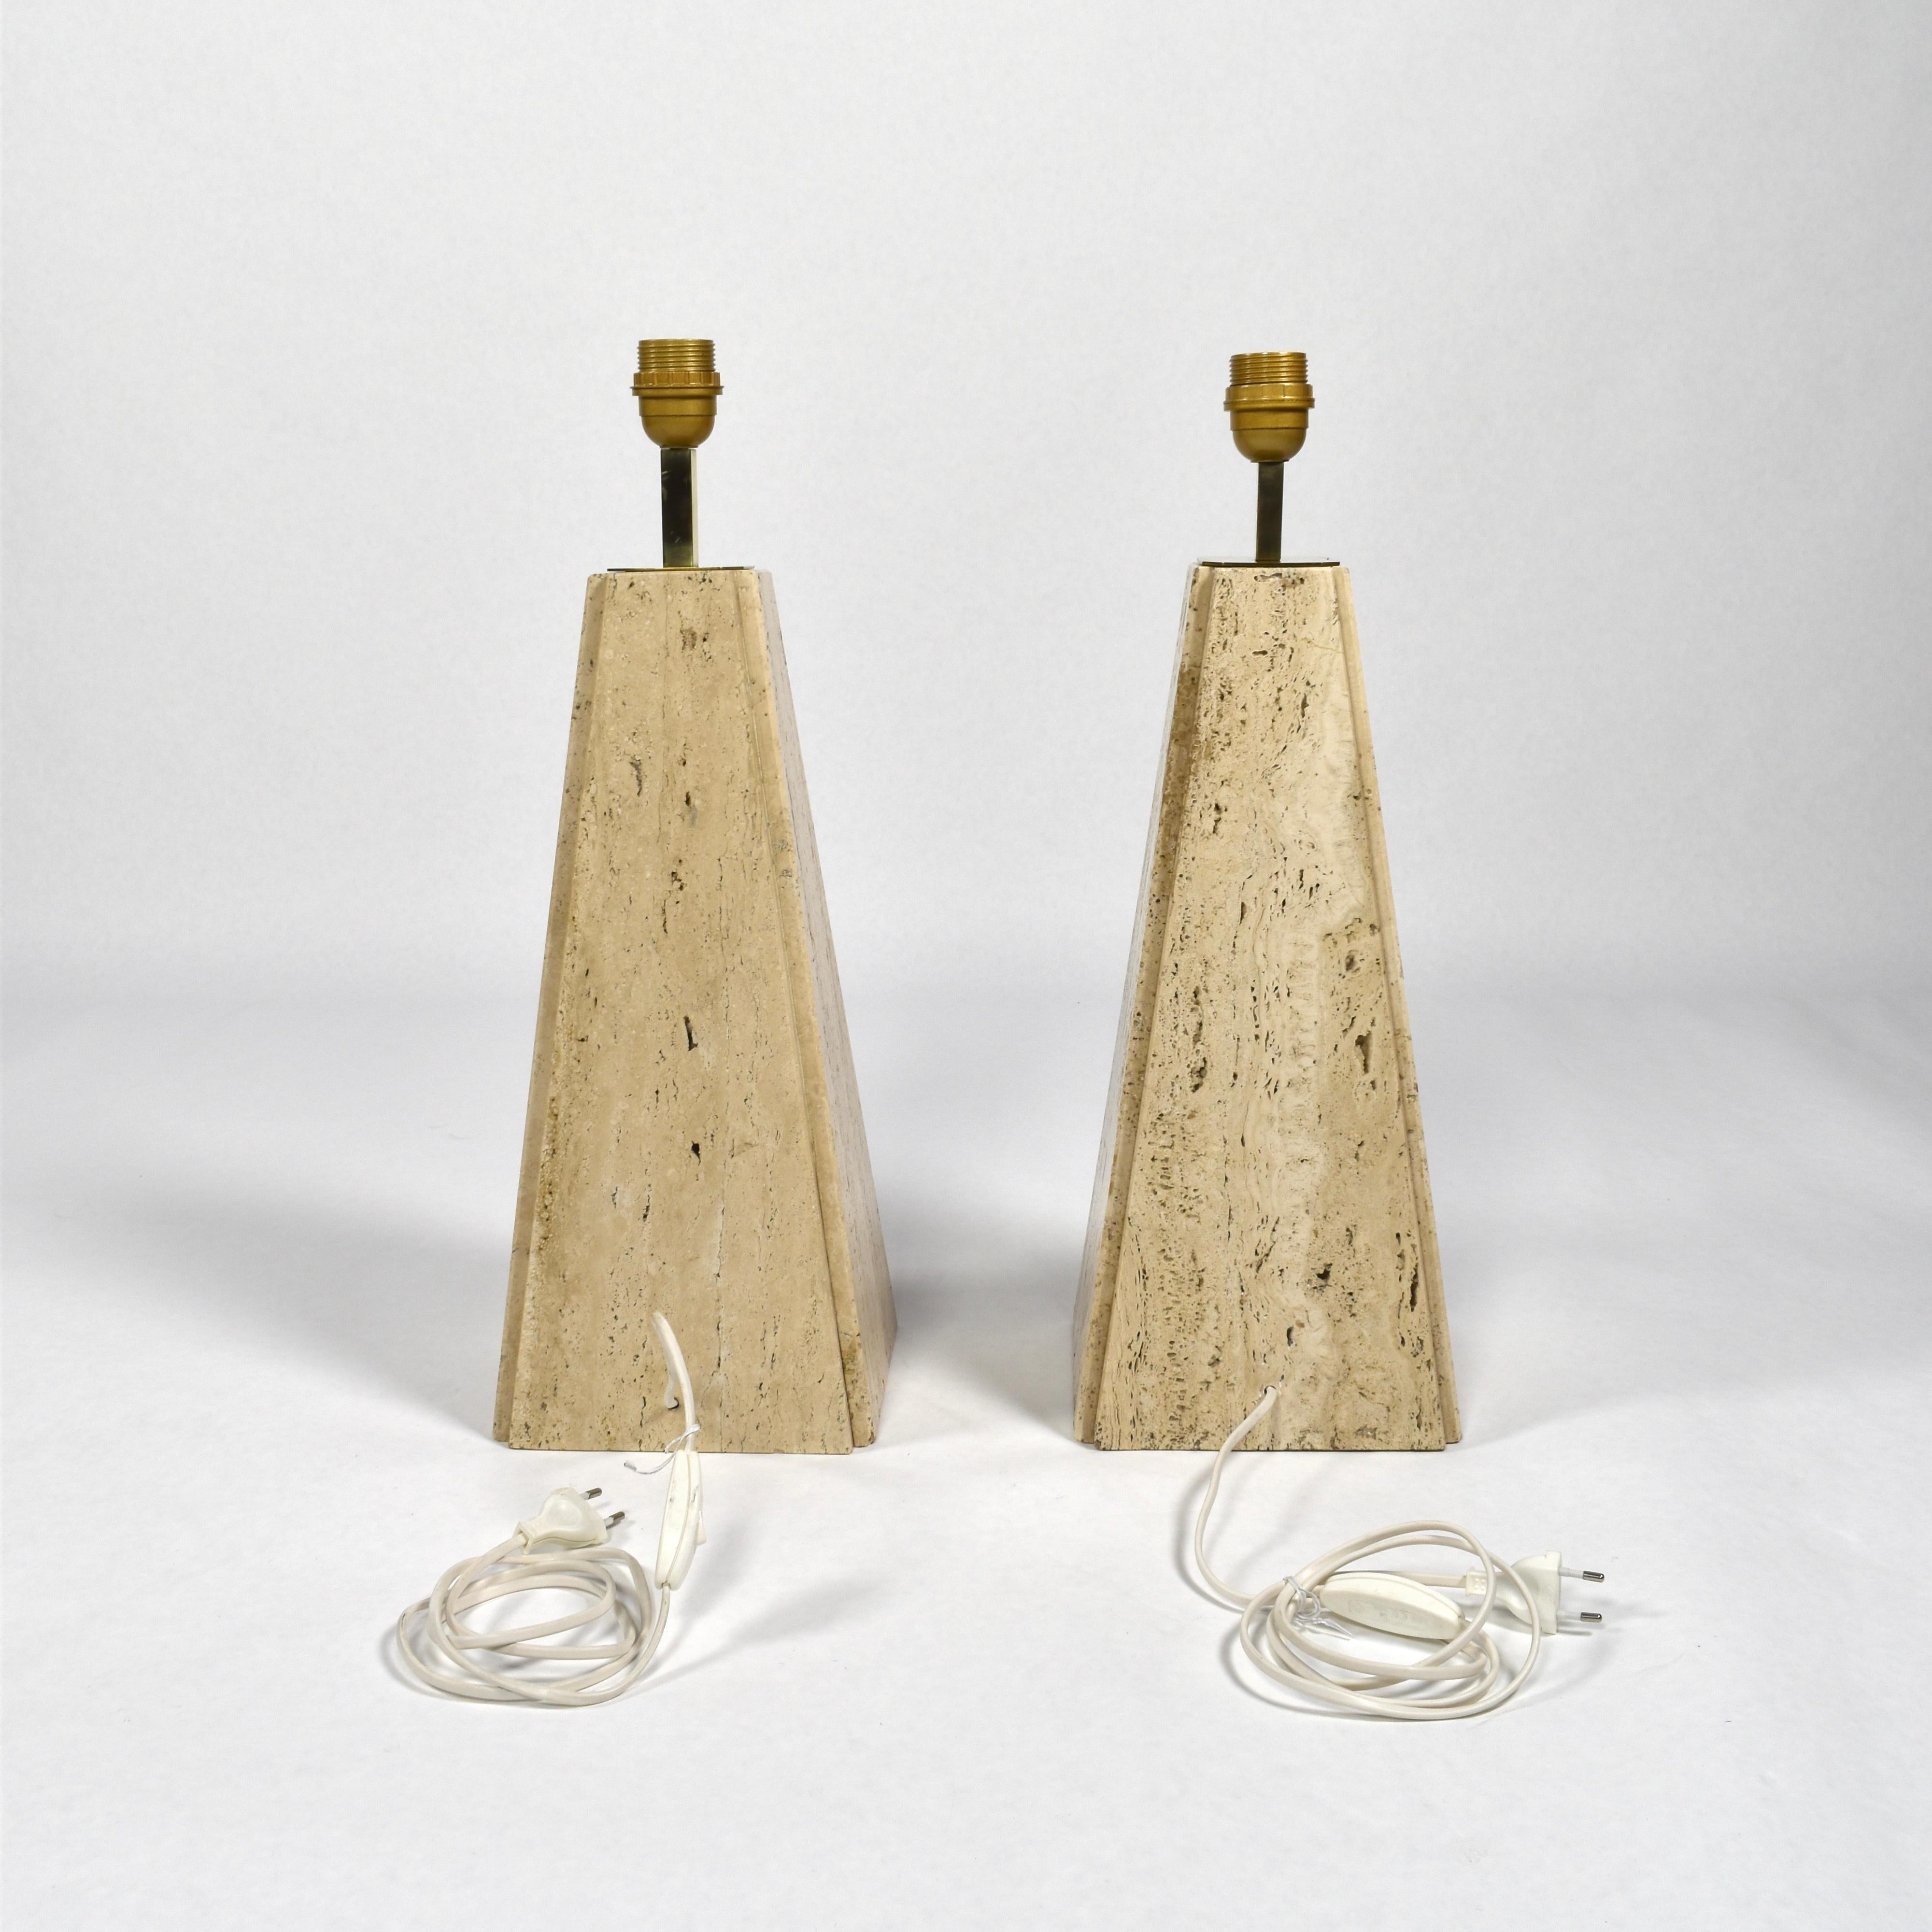 Pair of Camille Breesch Travertine and Brass Table Lamps, Belgium, circa 1970 2